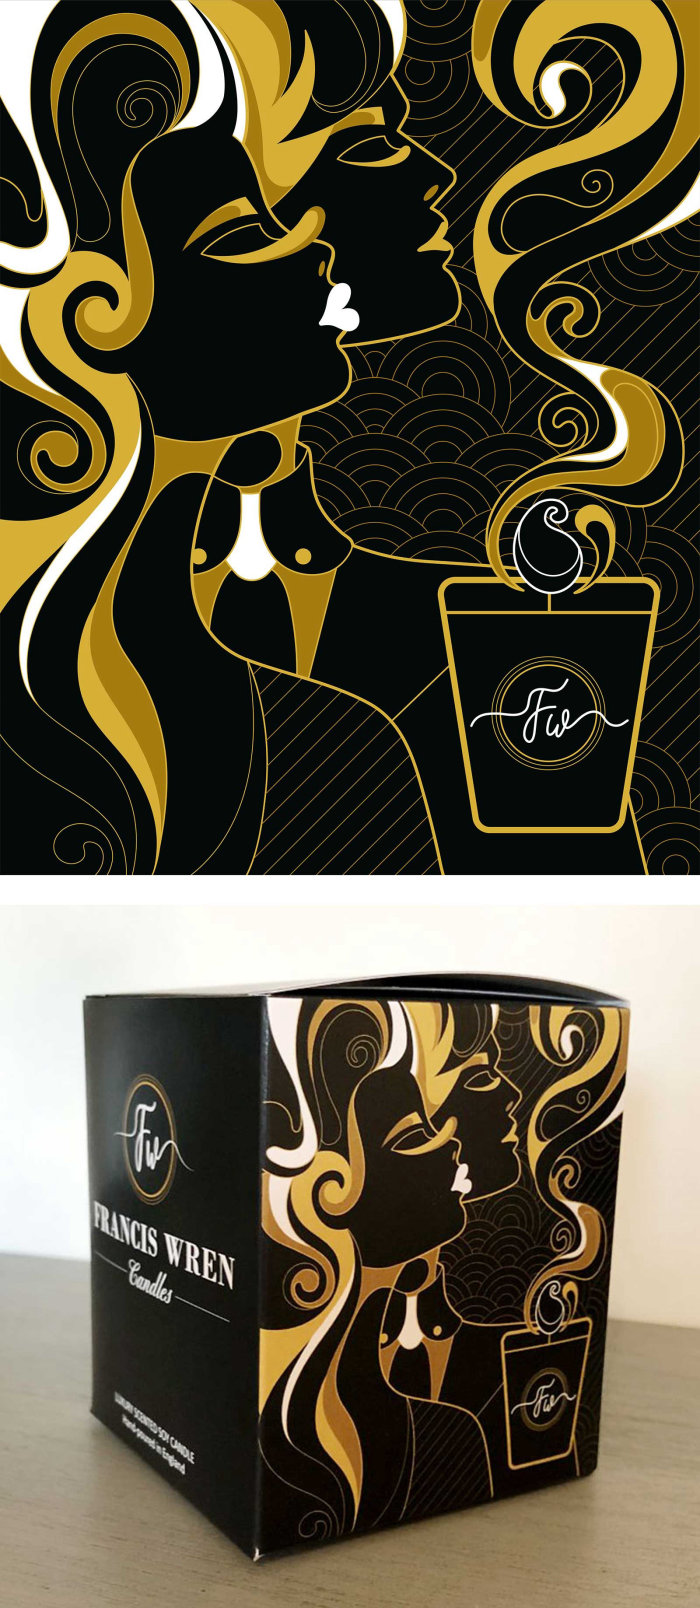 Packaging illustration of Francis Wren Candles